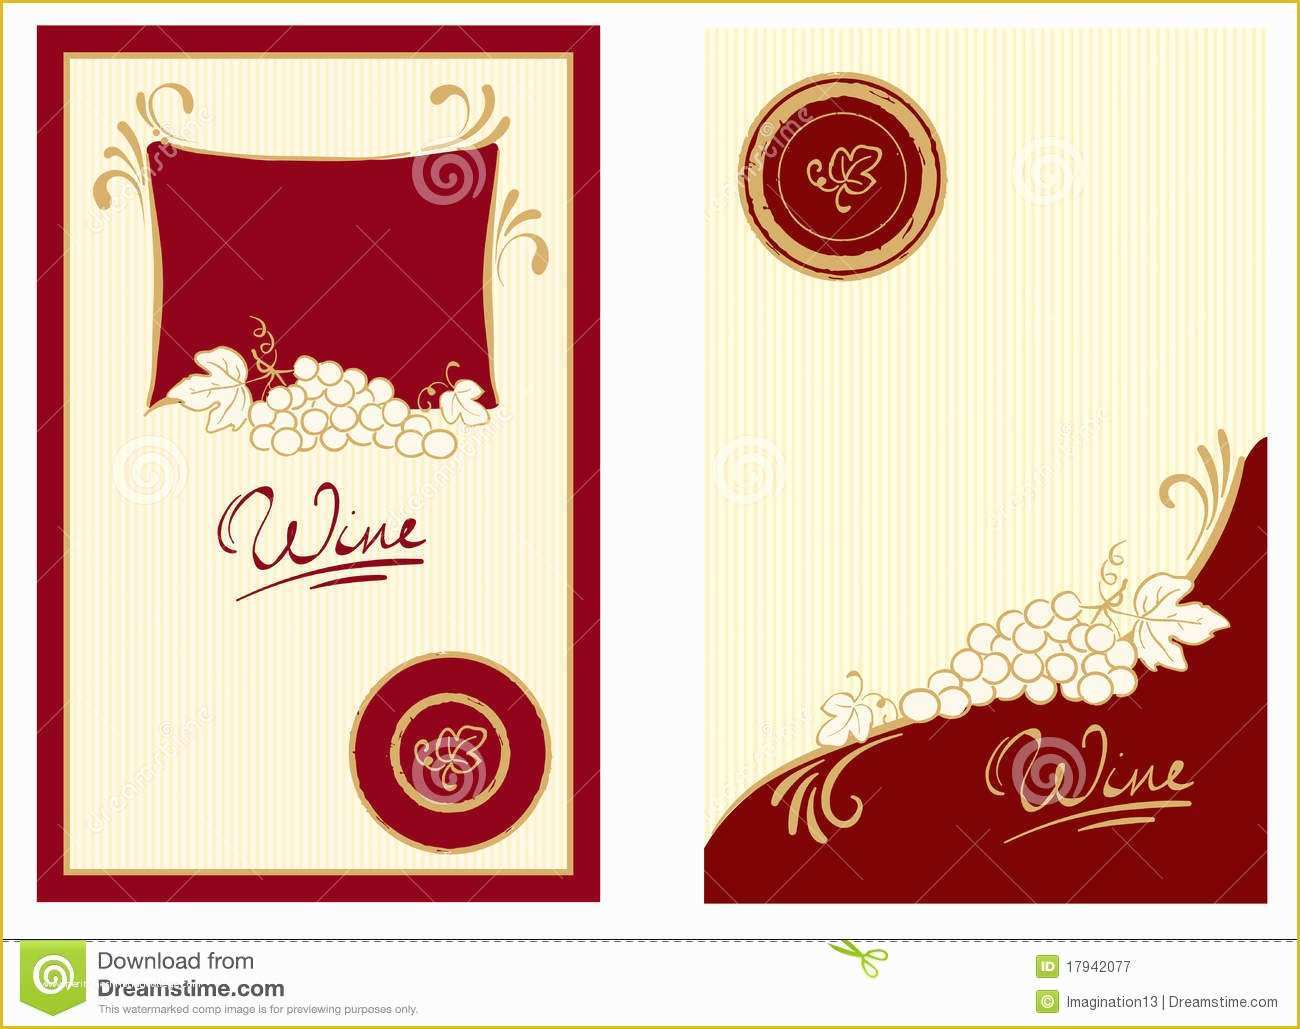 Free Wine Website Templates Download Of Wine Labels with Swirls Stock Vector Illustration Of Gold